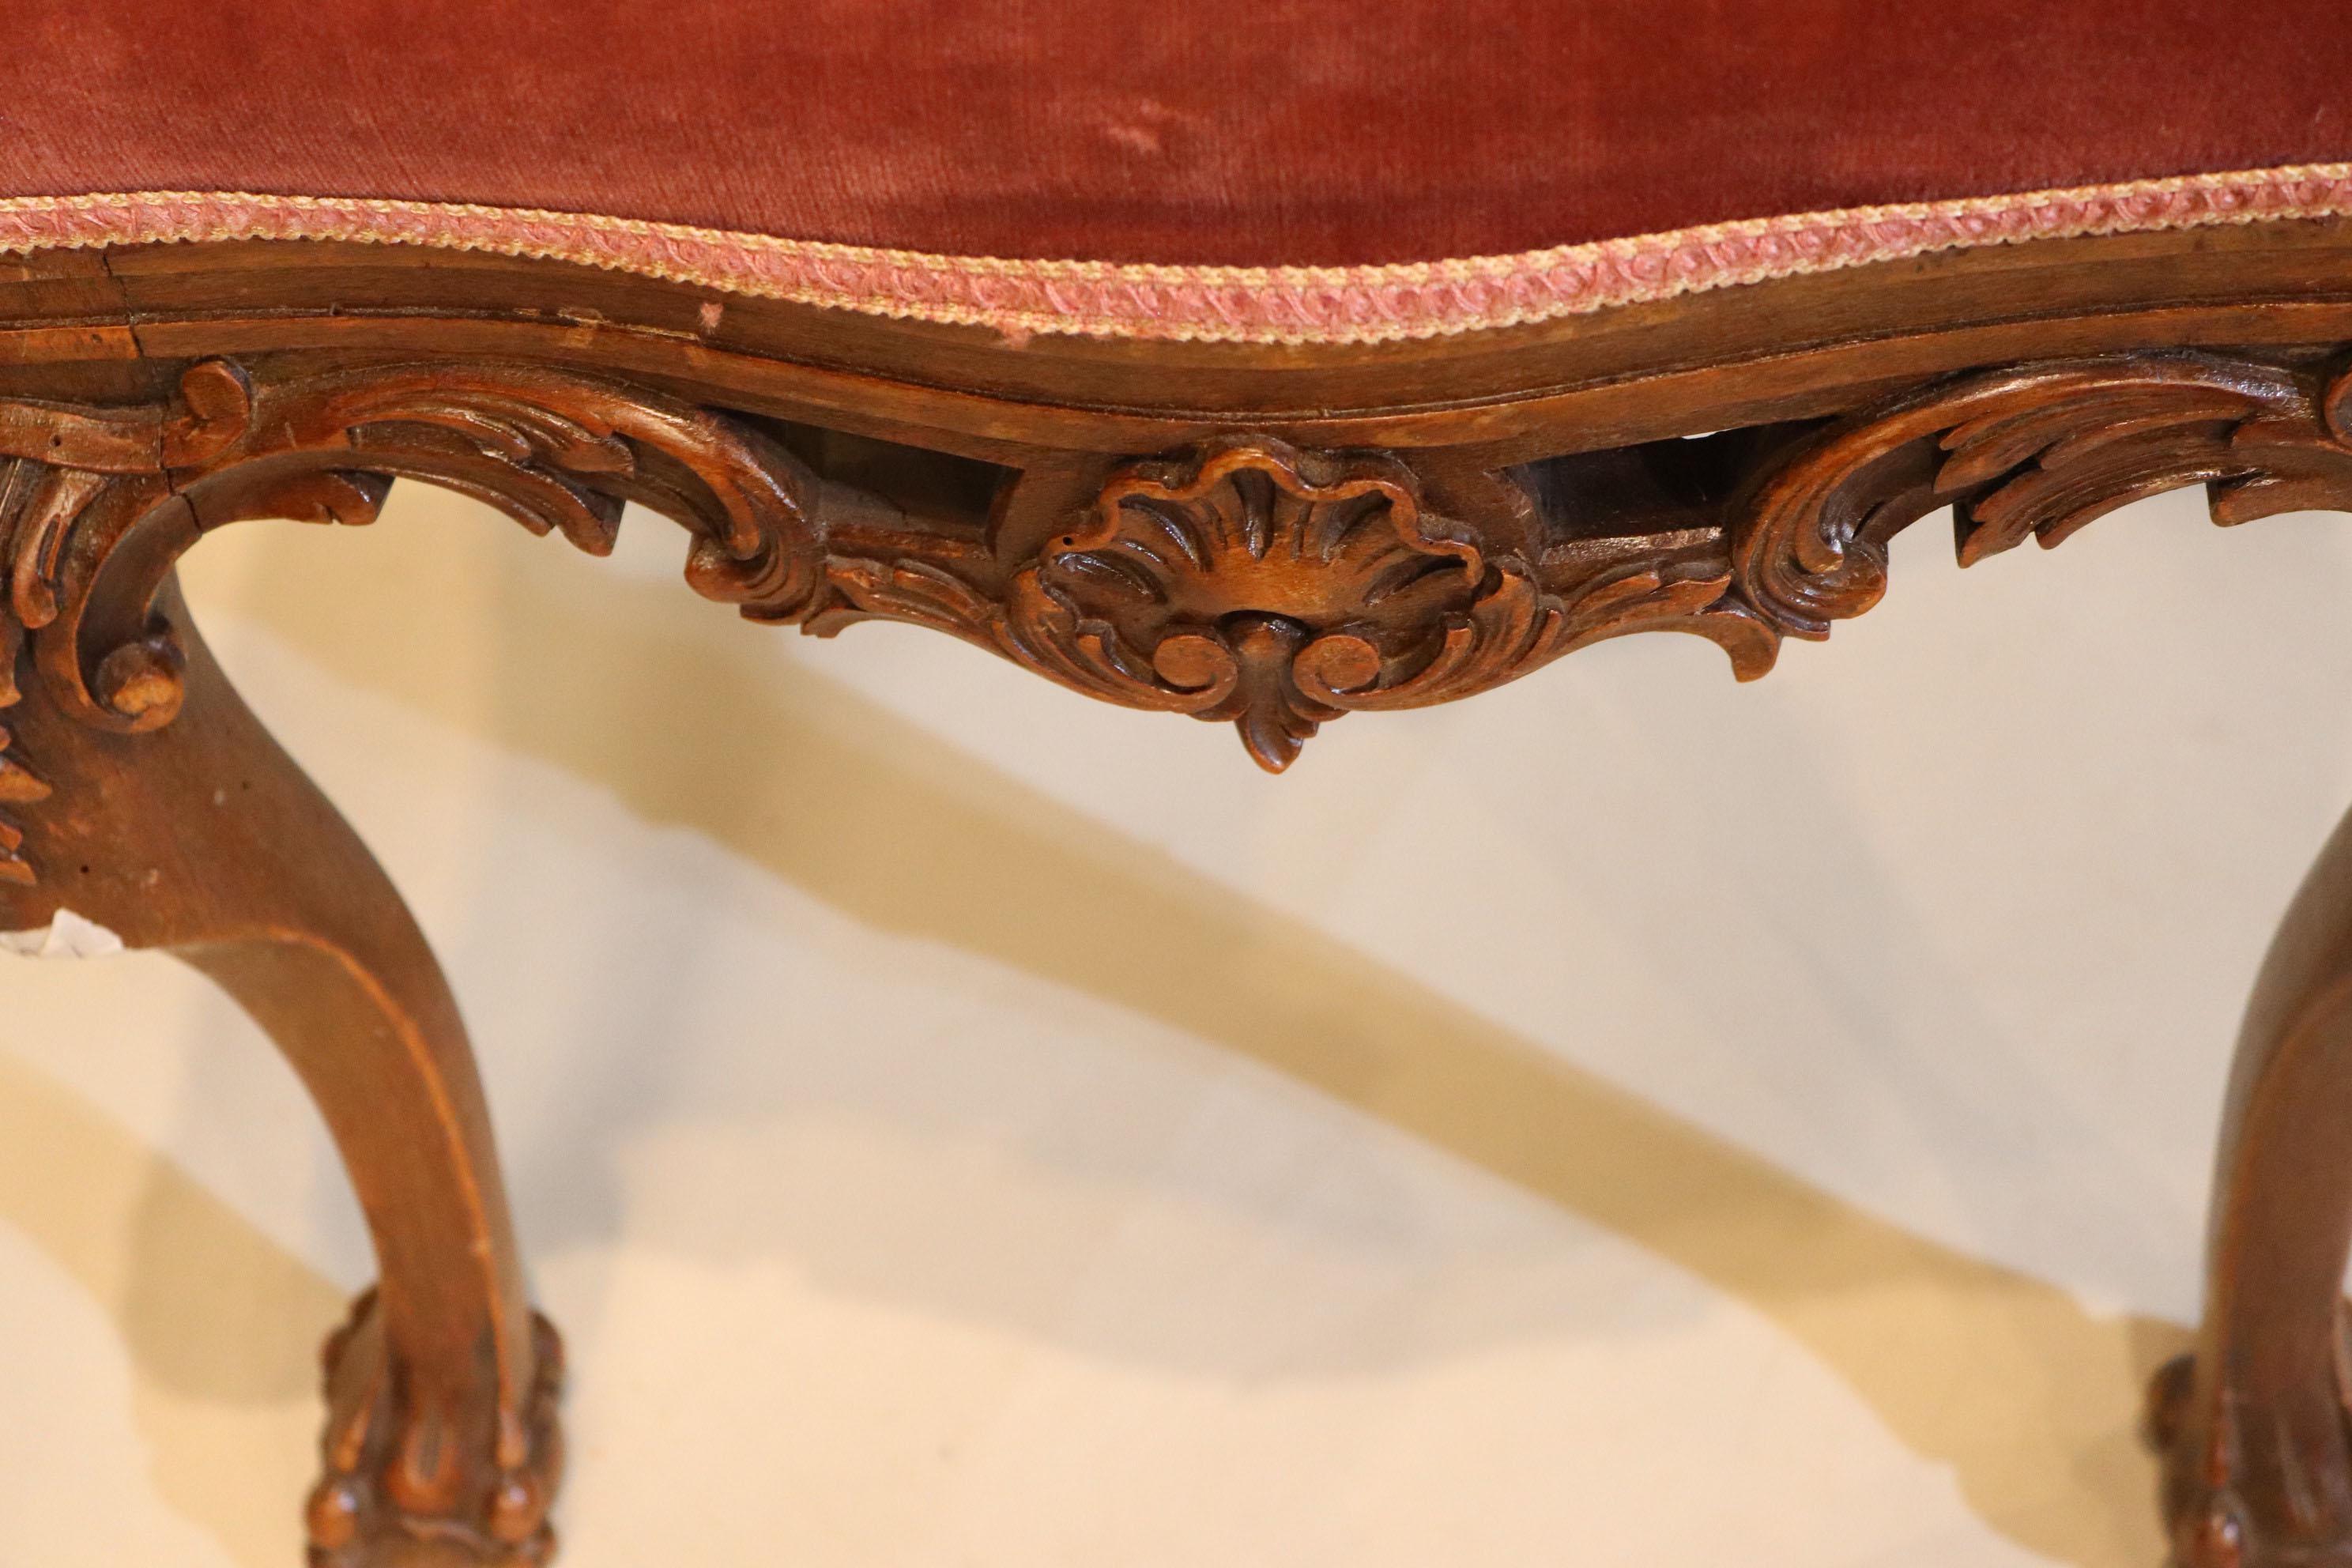 A fine pair of 19th century Portuguese mahogany hand carved benches. Elaborately carved and detailed with pawed feet